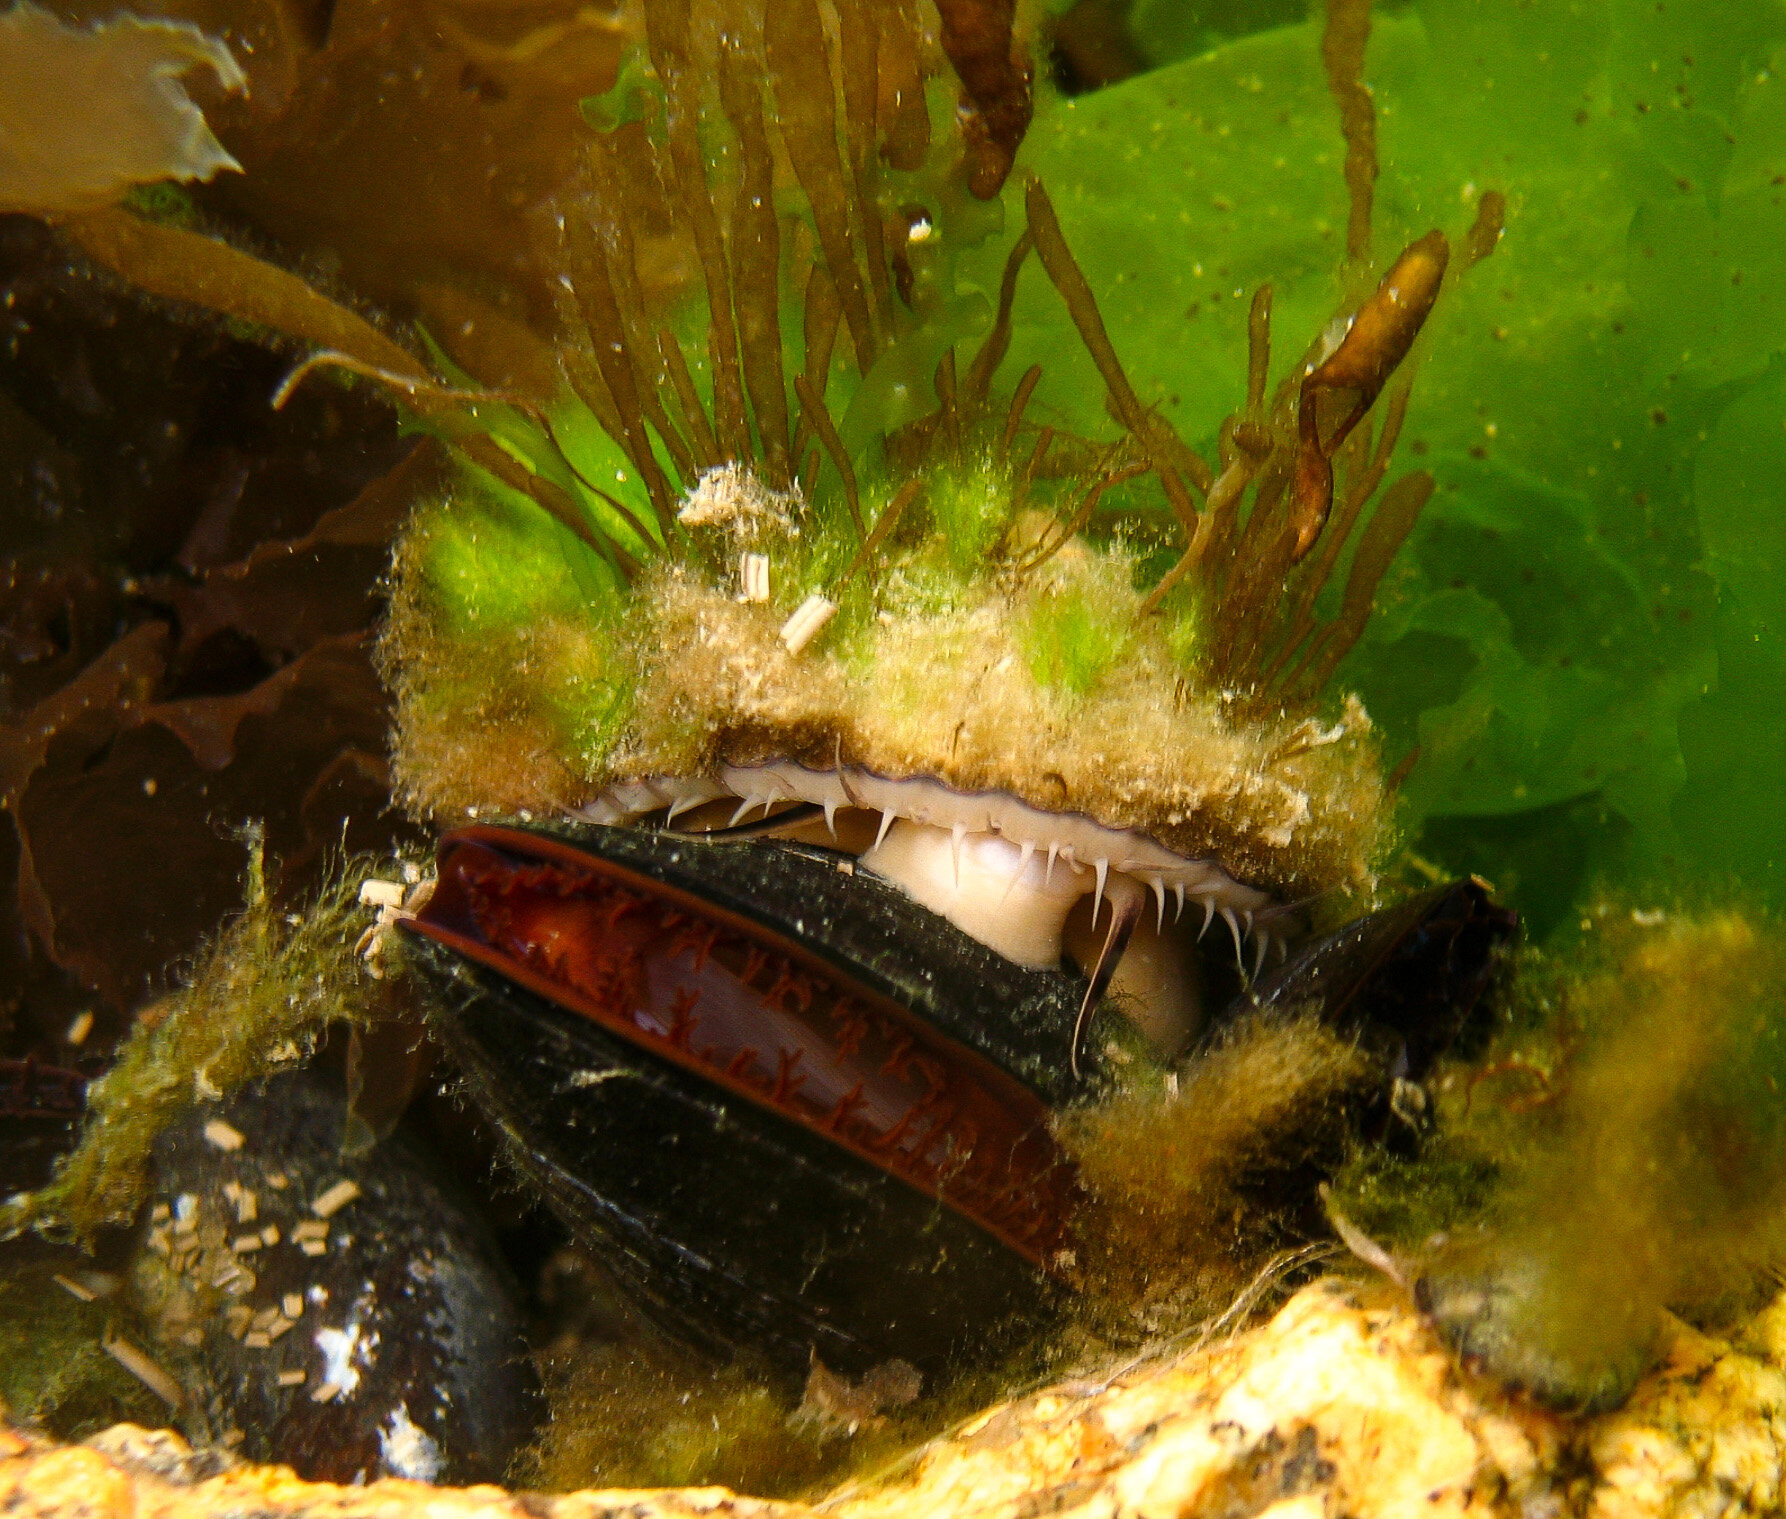 Blue mussel and keyhole limpet - Photo by Jaime Ojeda